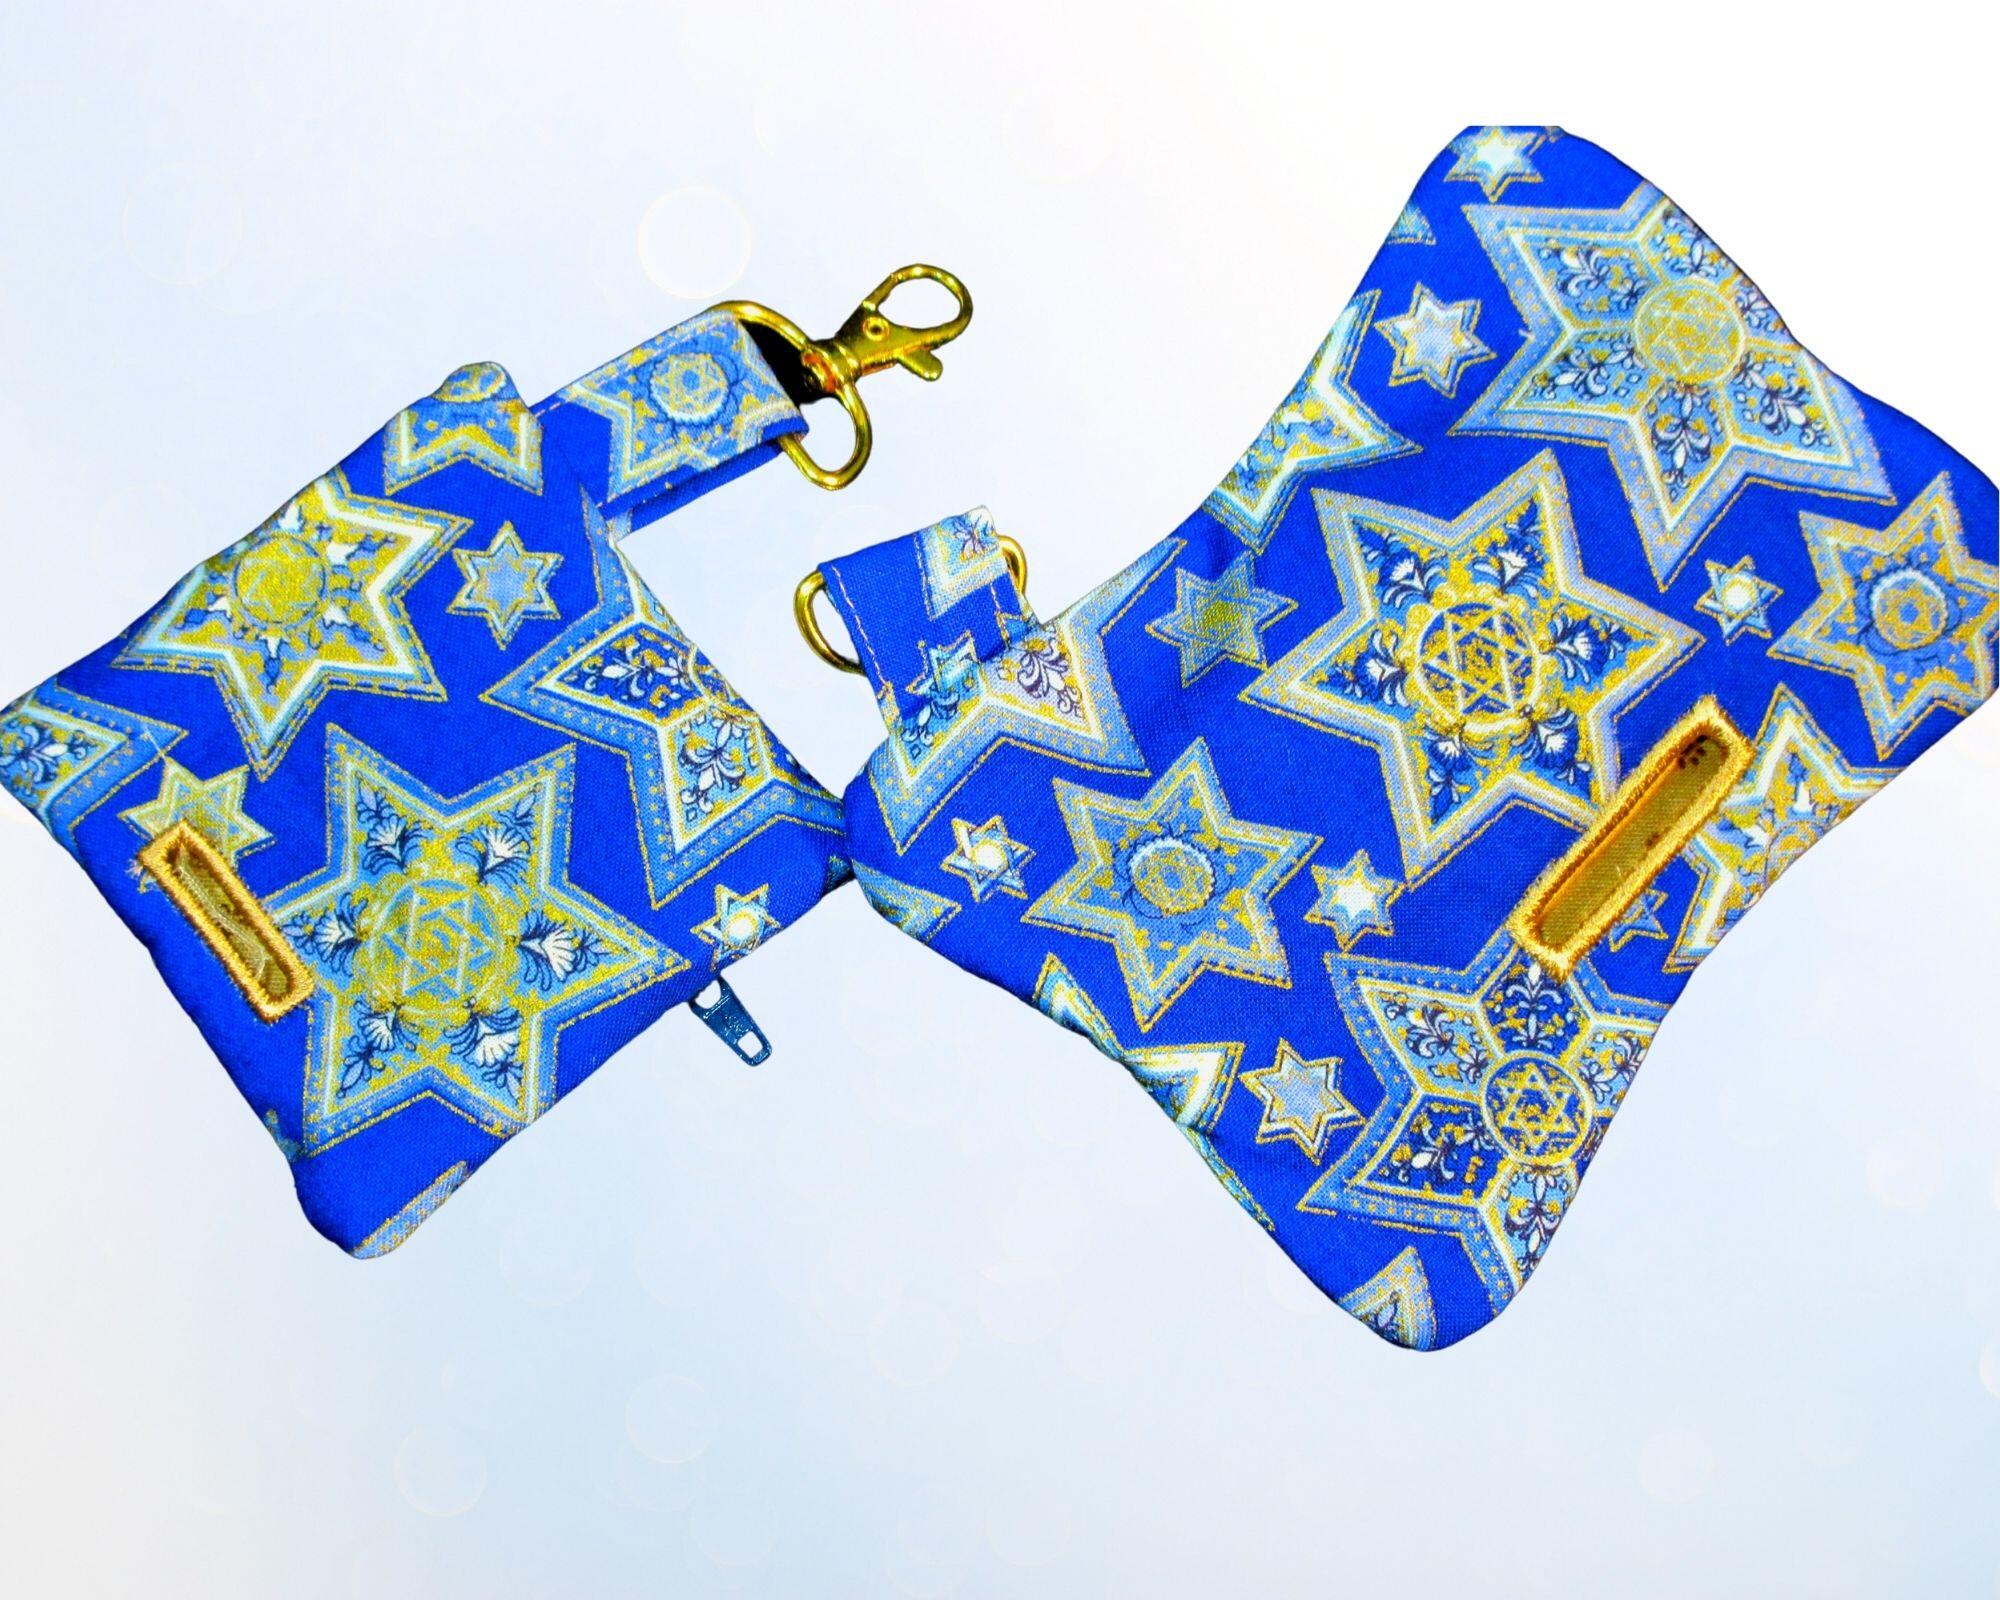 2 sizes Jewish star 6 points blue and gold with gold tone hardware Multi purpose pouch Handmade by a Fur Baby Favorite dog poop bag holder waste bag dispenser training treat pouch binky pacifier bag change purse pouch